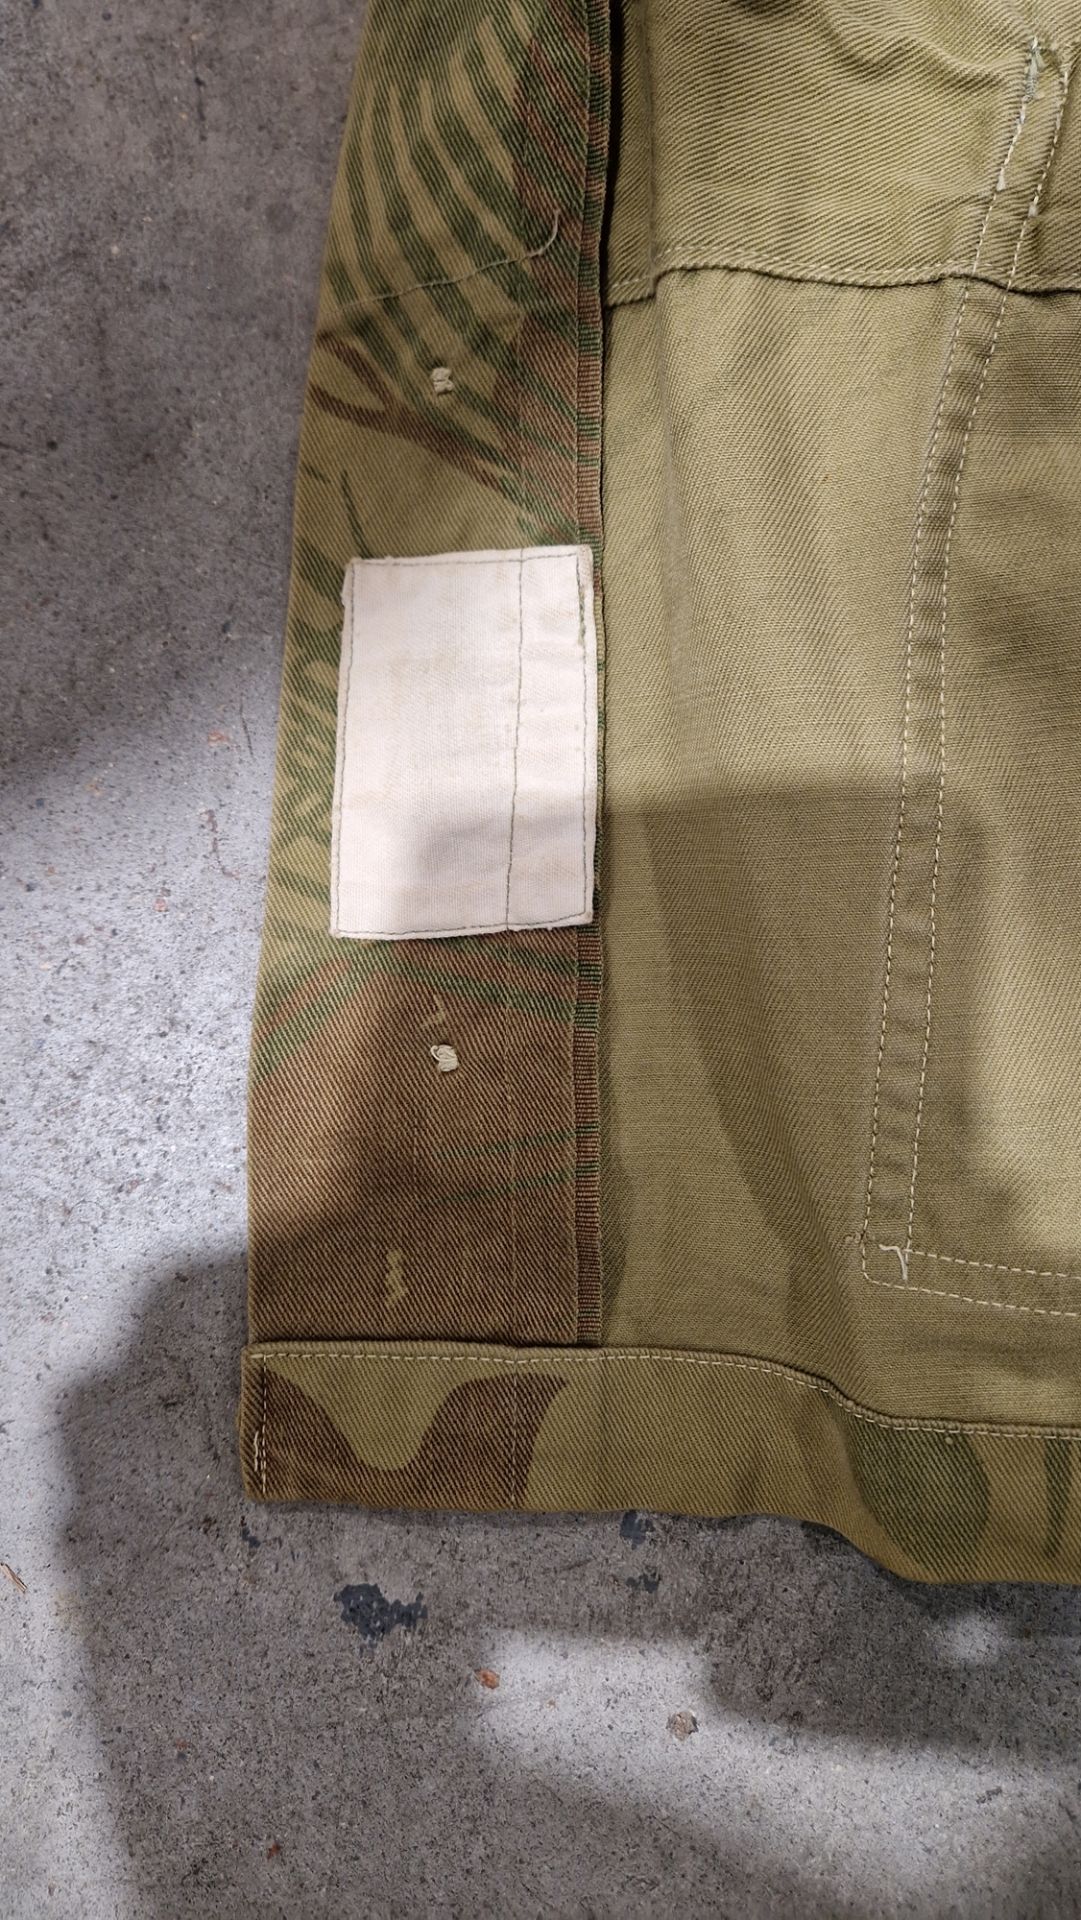 1950's Rhodesian combat jacket and a 1970's camouflage jacket (2)  Condition Report Photos uploaded - Image 2 of 6